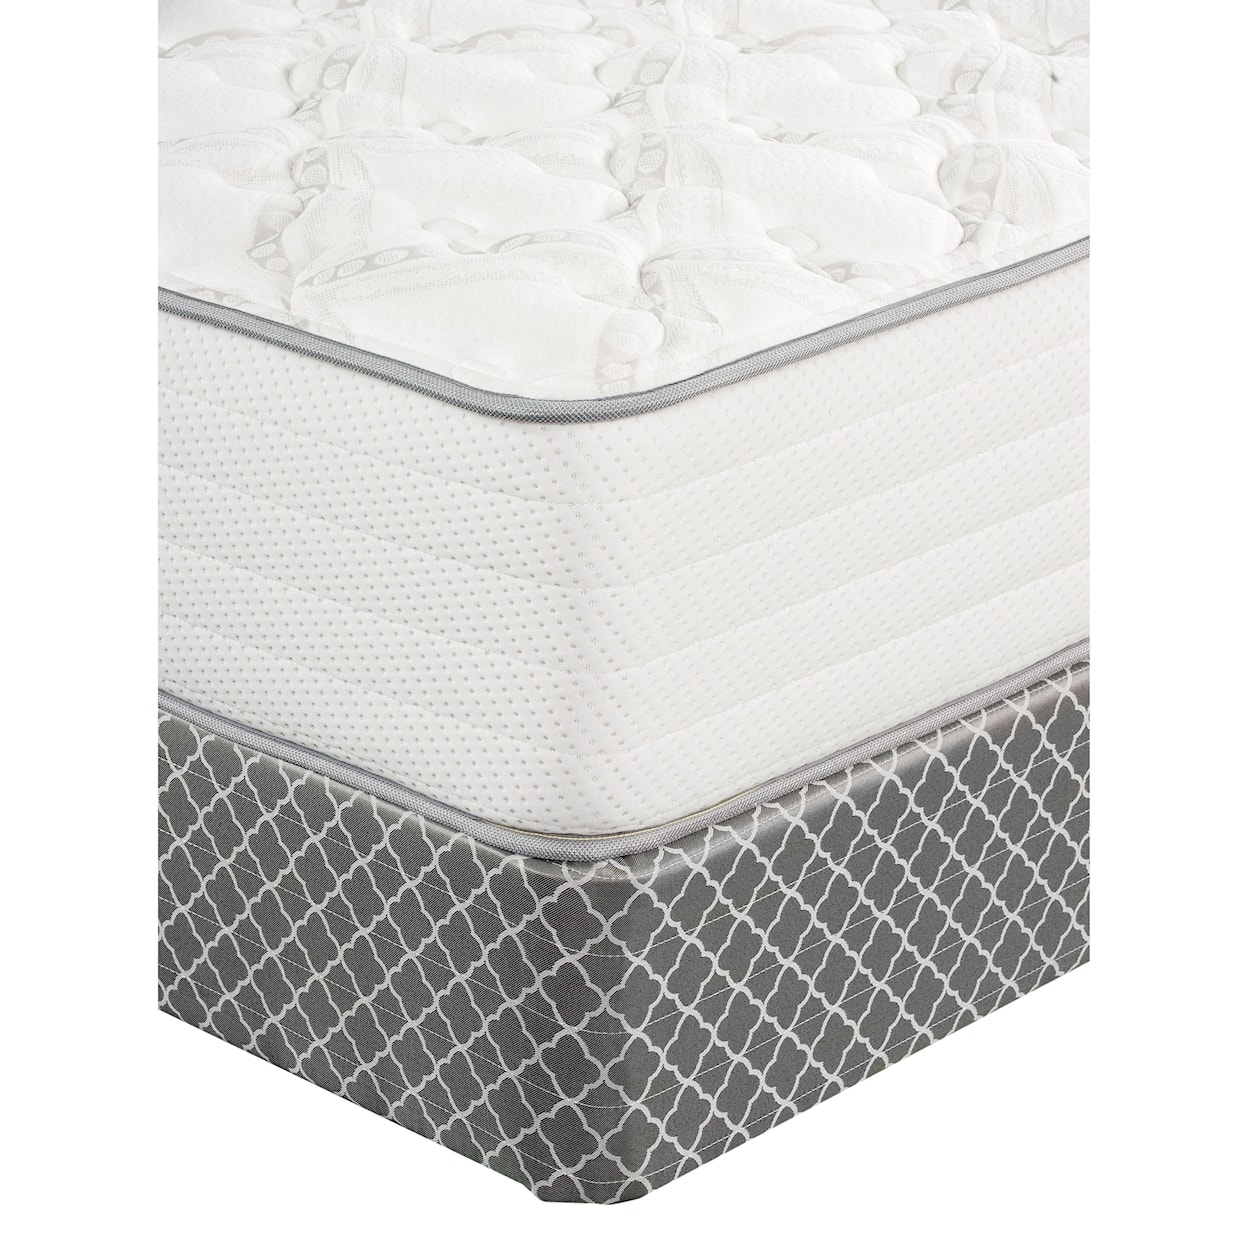 King Koil Gracie Firm Twin Firm Pocketed Coil Mattress Set